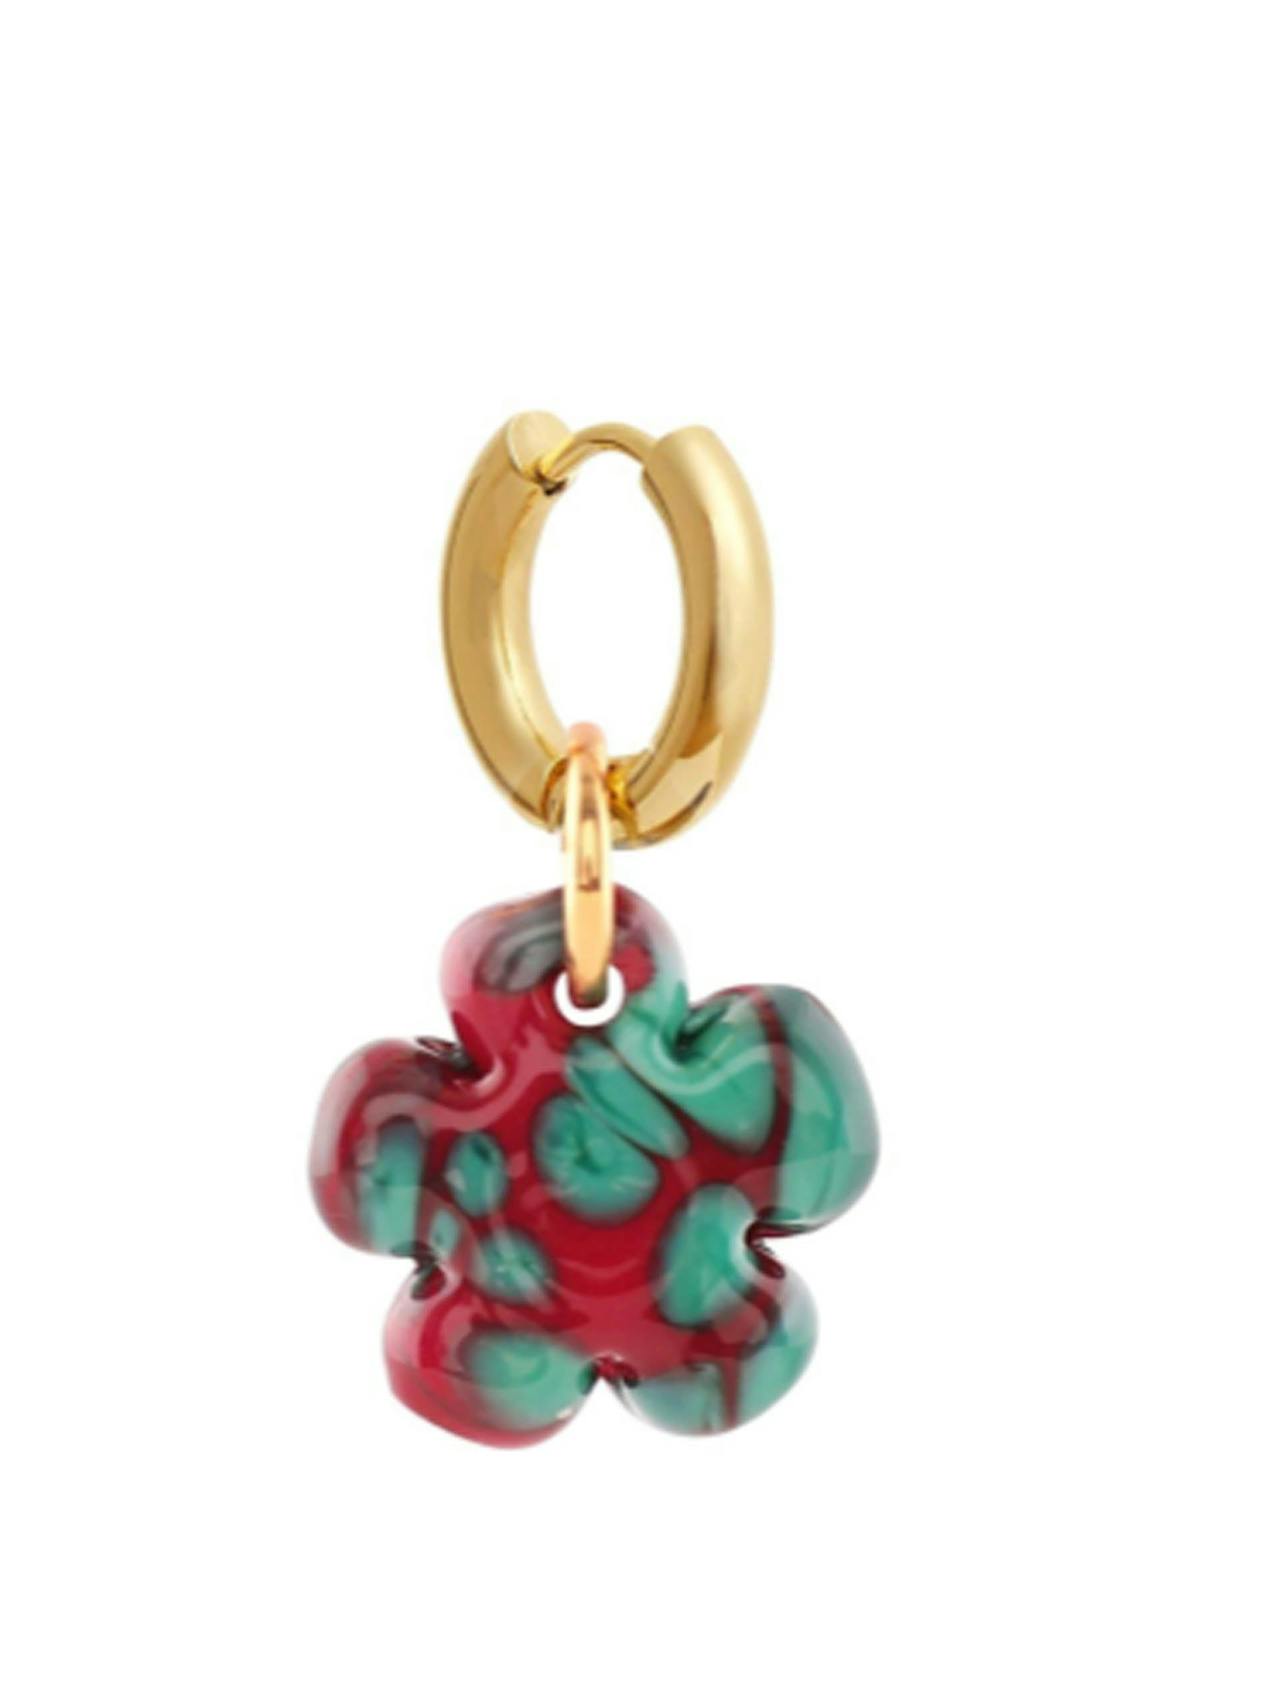 Red and turquoise glass clover earring